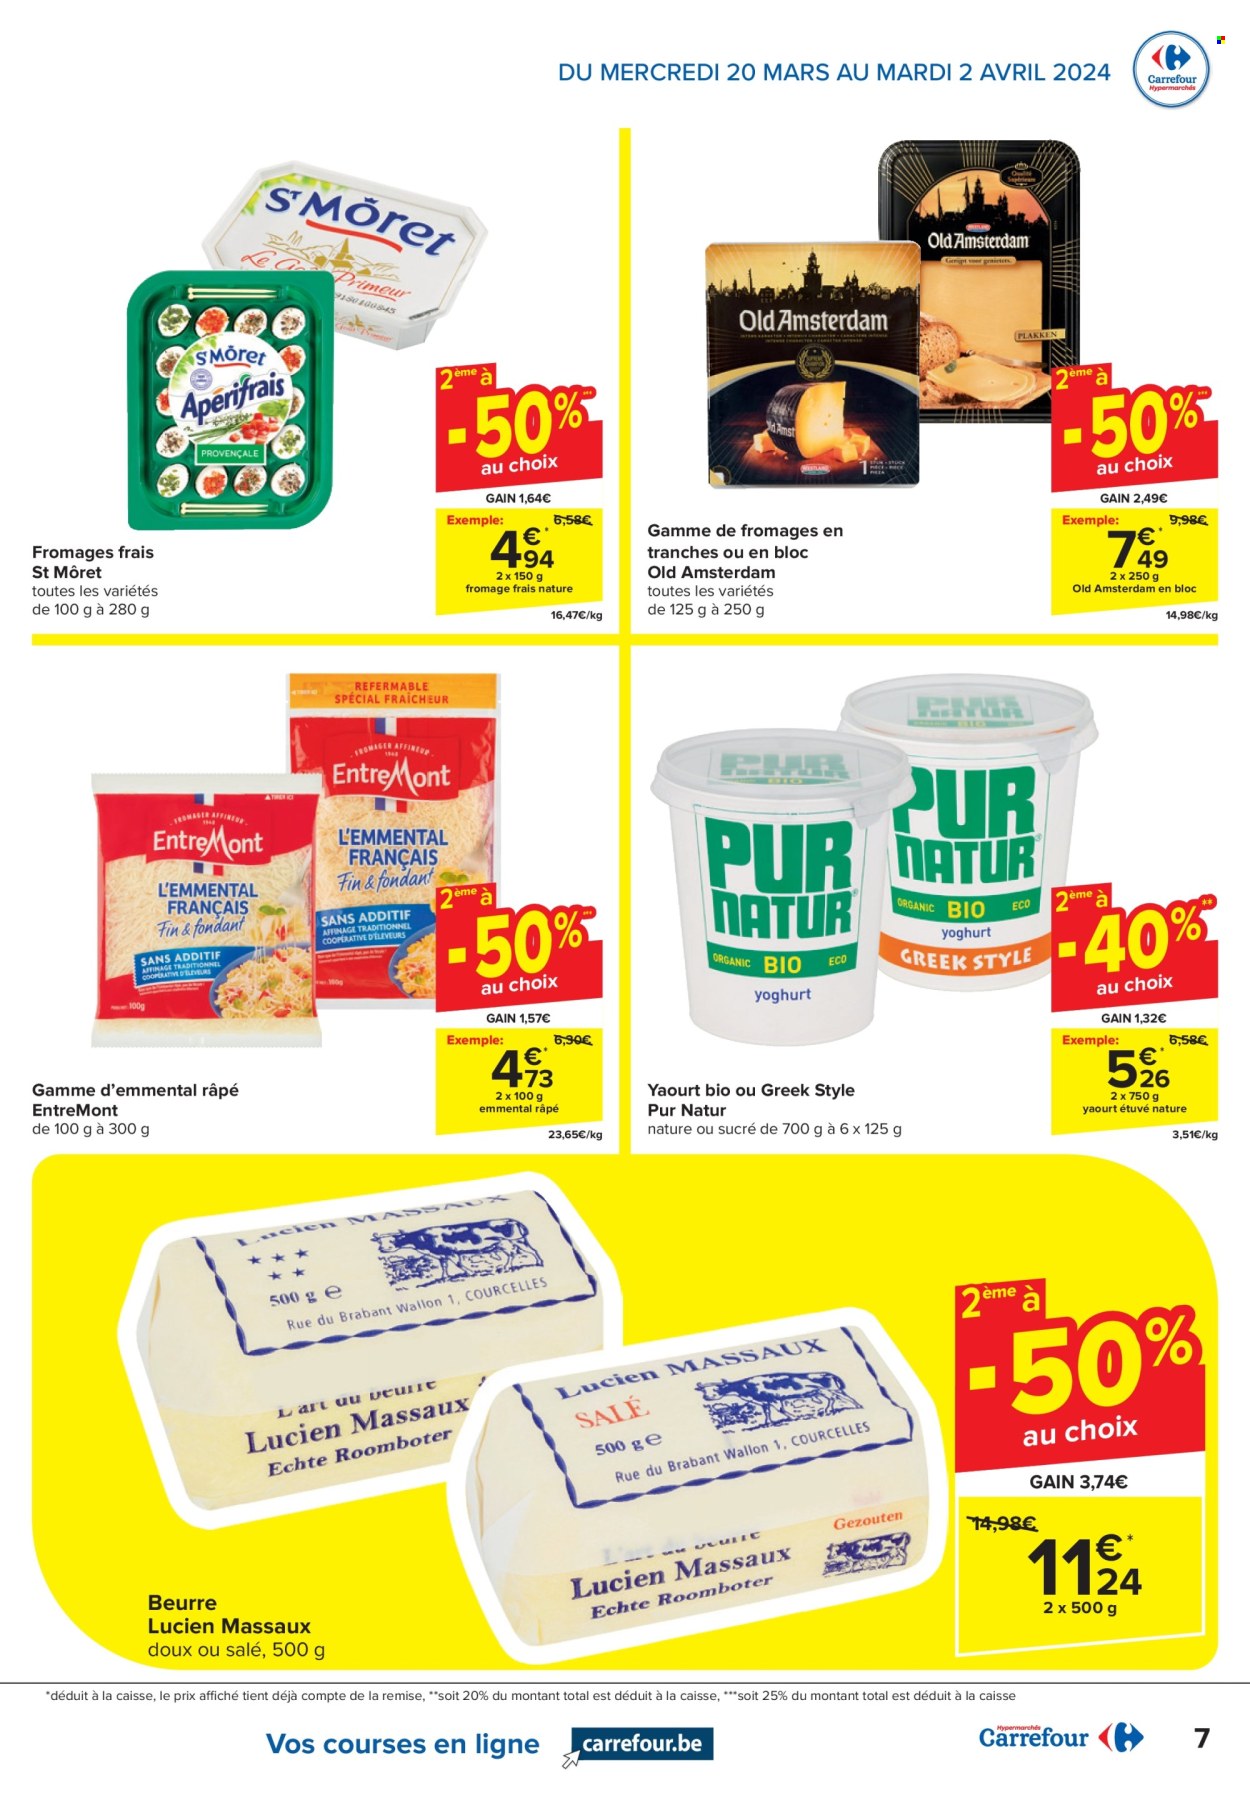 Catalogue Carrefour hypermarkt - 20.3.2024 - 2.4.2024. Page 7.